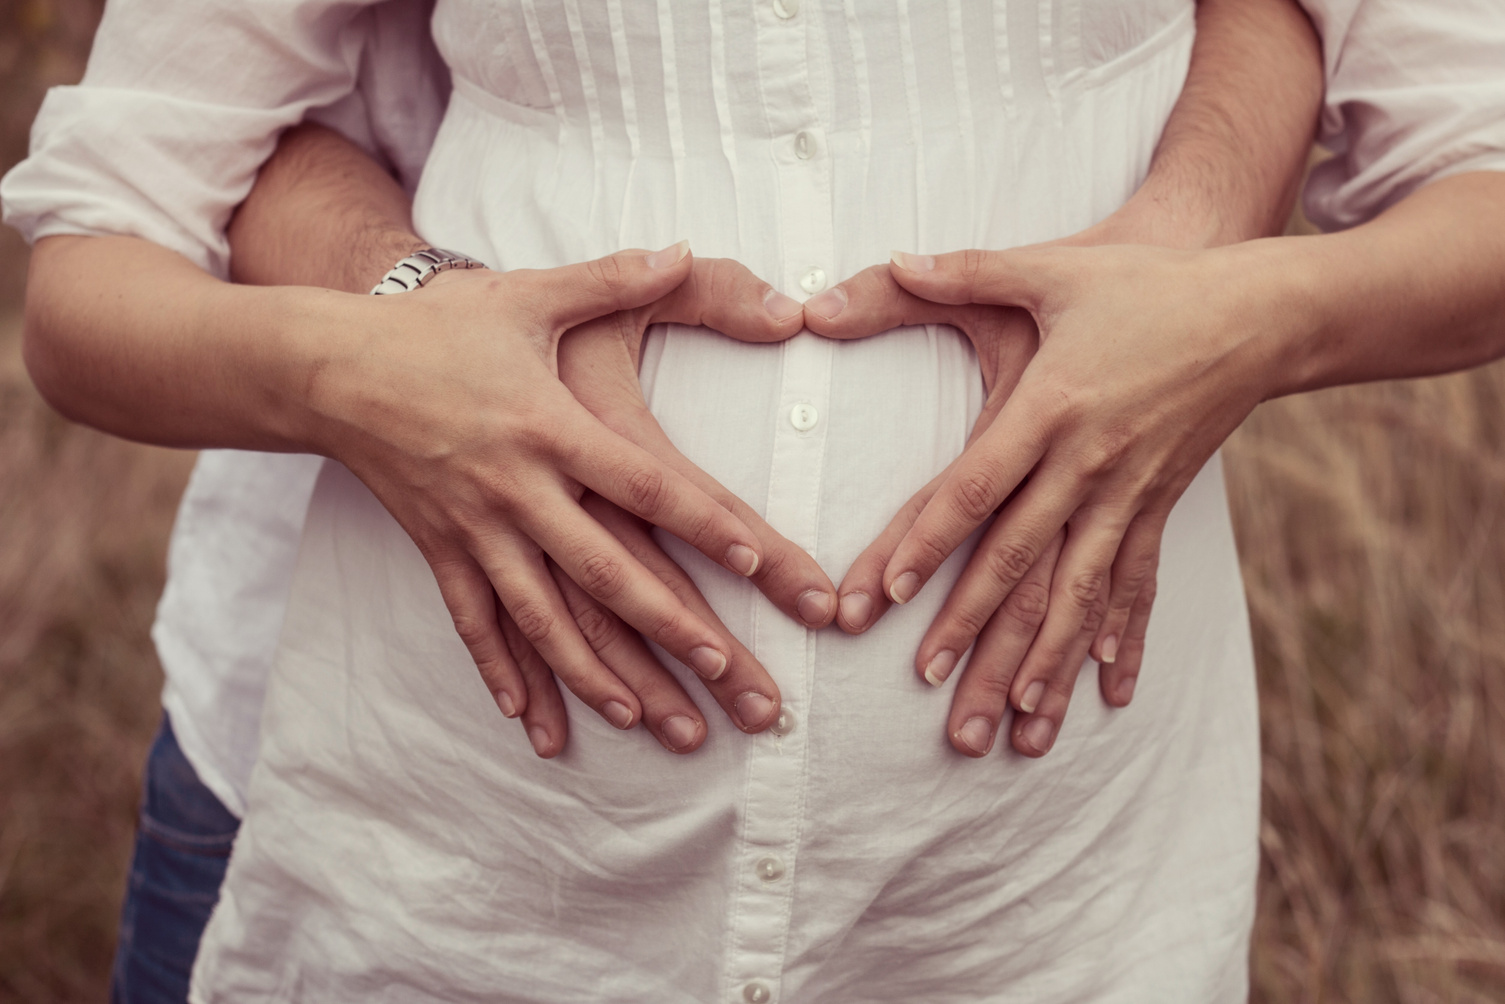 Pregnant Couple Making Heart Shaped Gesture on Belly